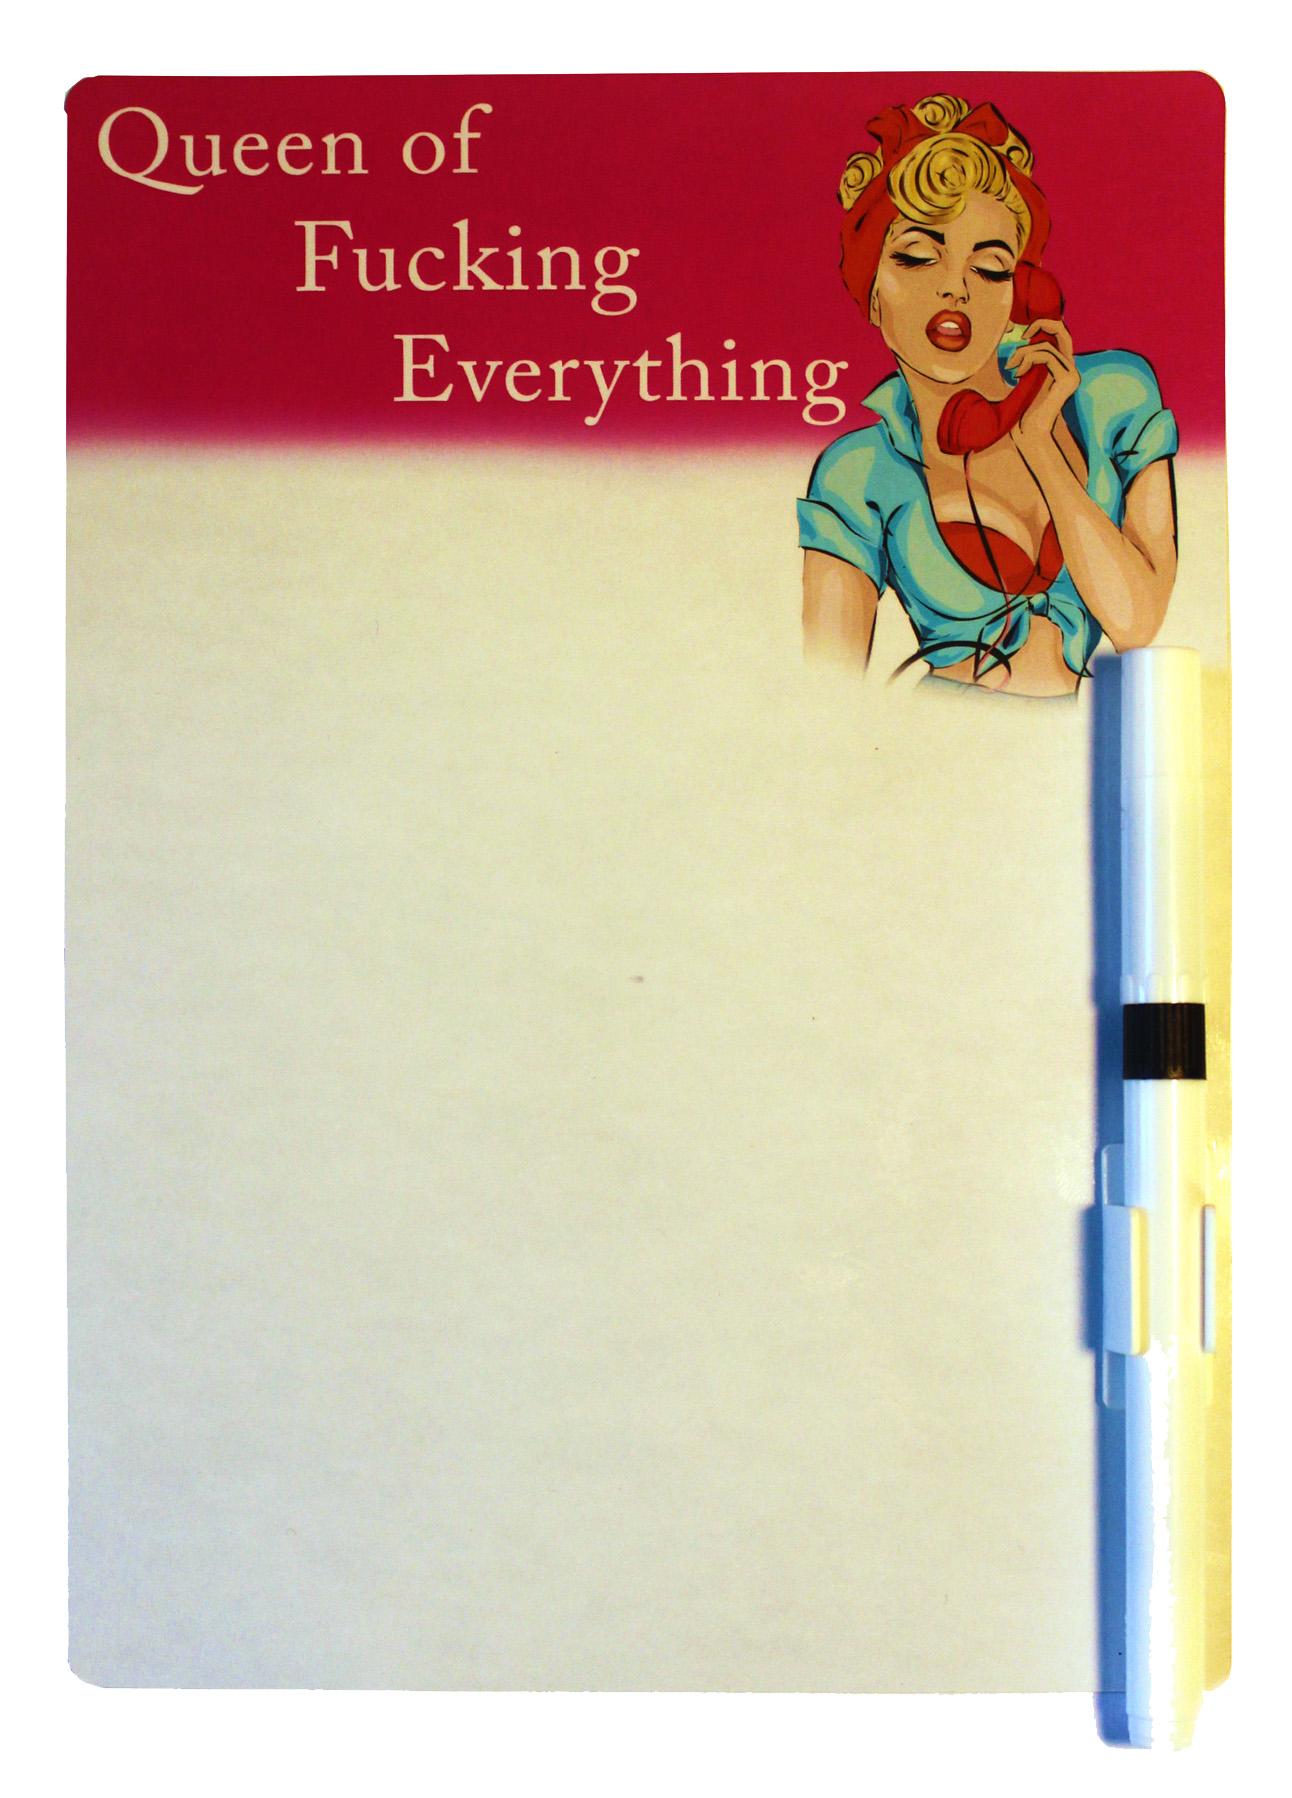 Queen of Fucking Everything Magnetic Reminder Memo board